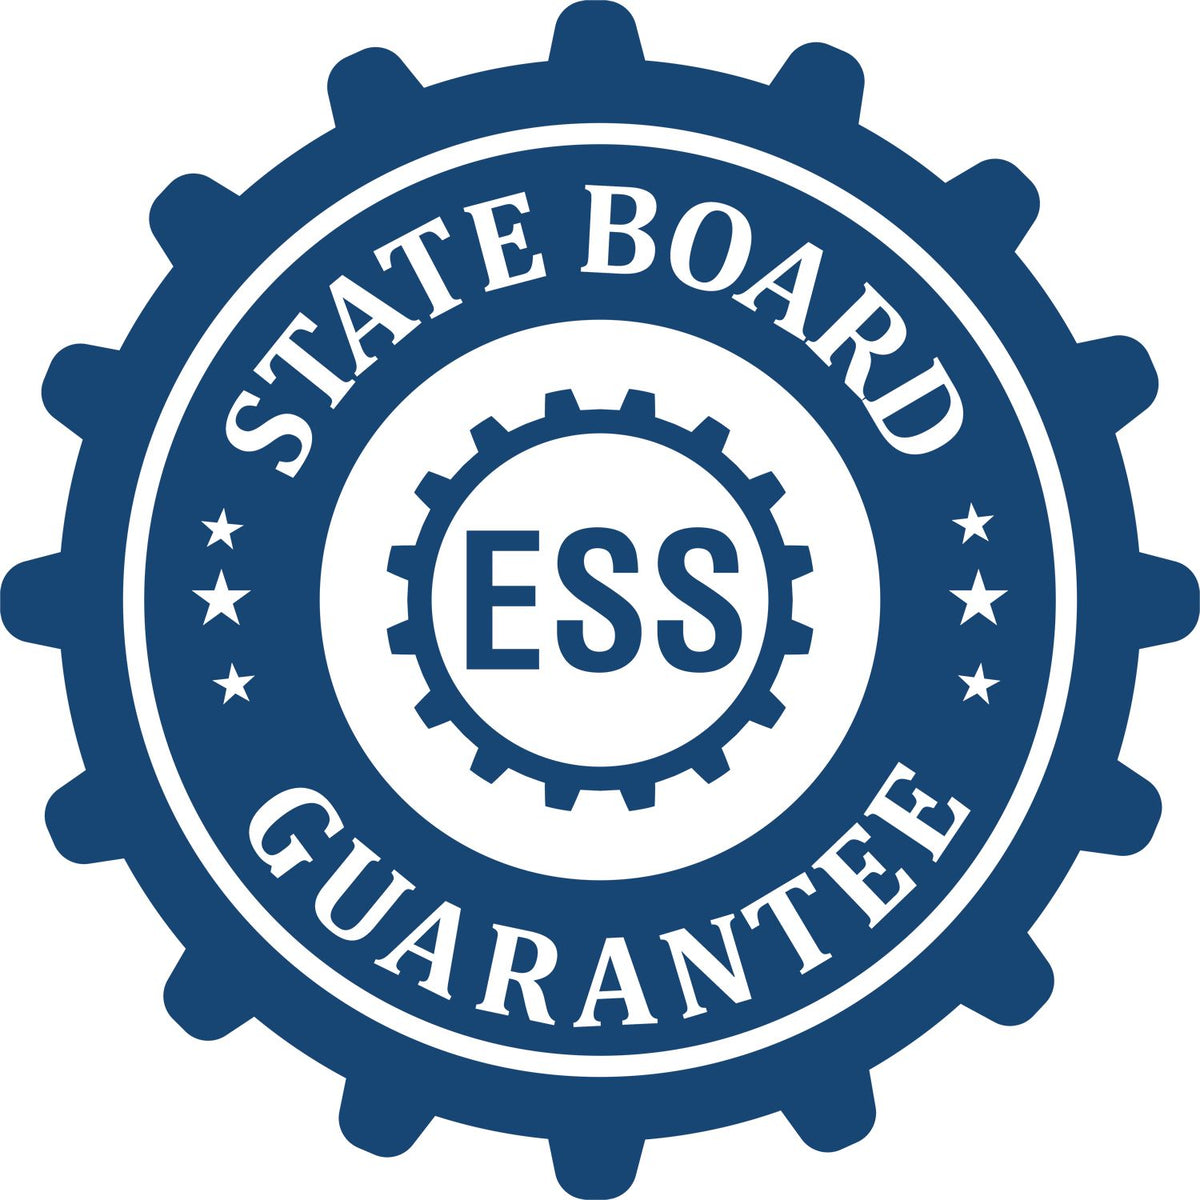 An emblem in a gear shape illustrating a state board guarantee for the Wooden Handle Maryland Rectangular Notary Public Stamp product.